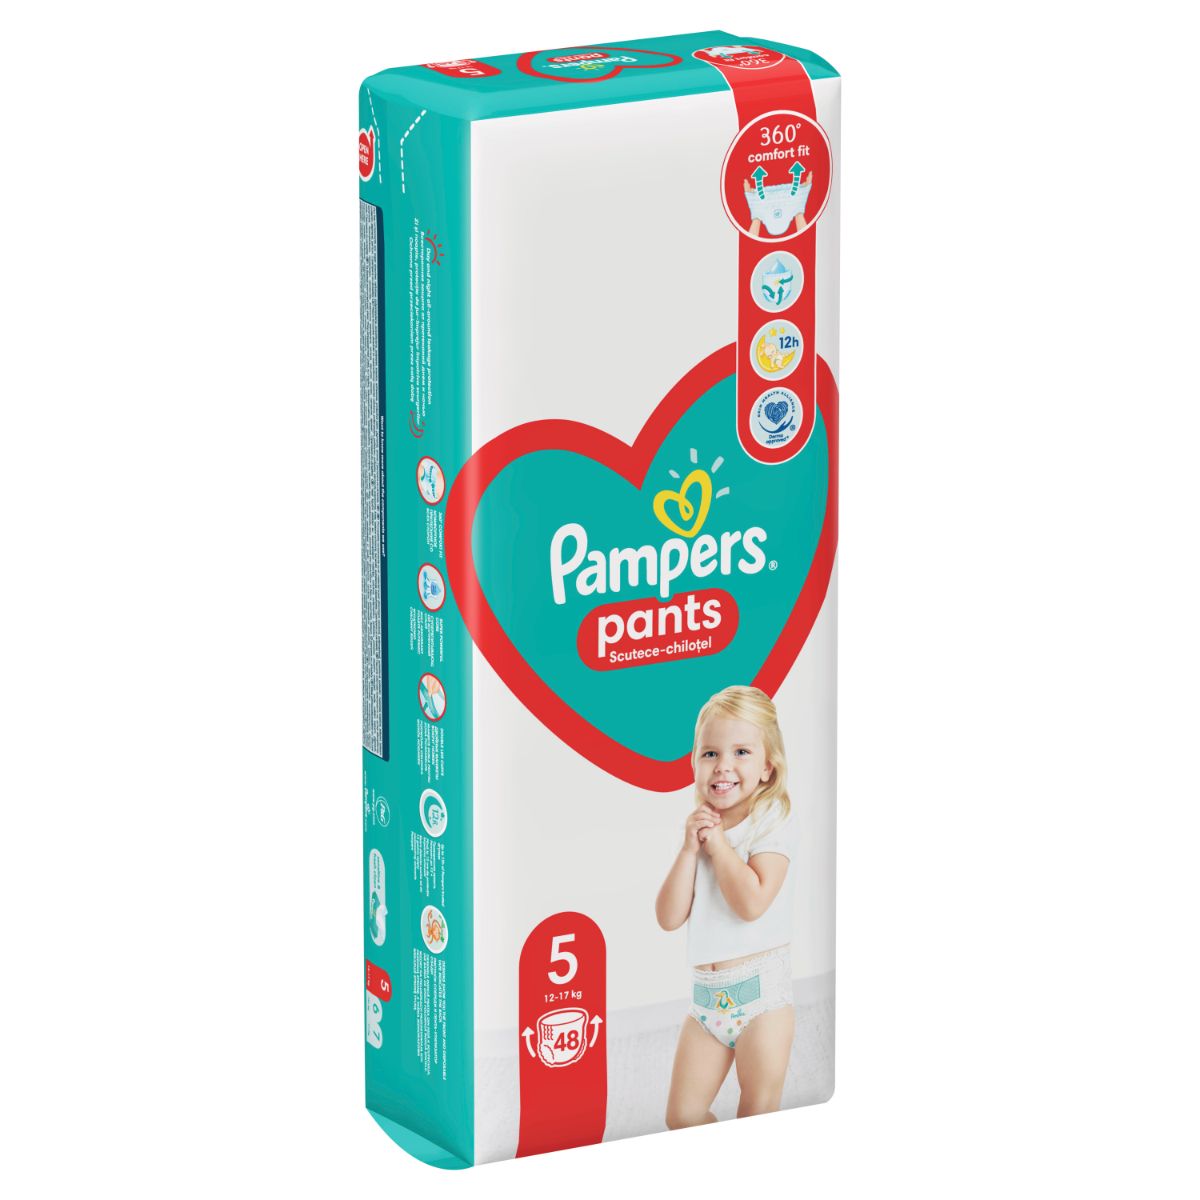 Scutece Pampers 5 Chilotel Act Baby, 12-17 kg, 48 buc 12-17 imagine 2022 protejamcopilaria.ro